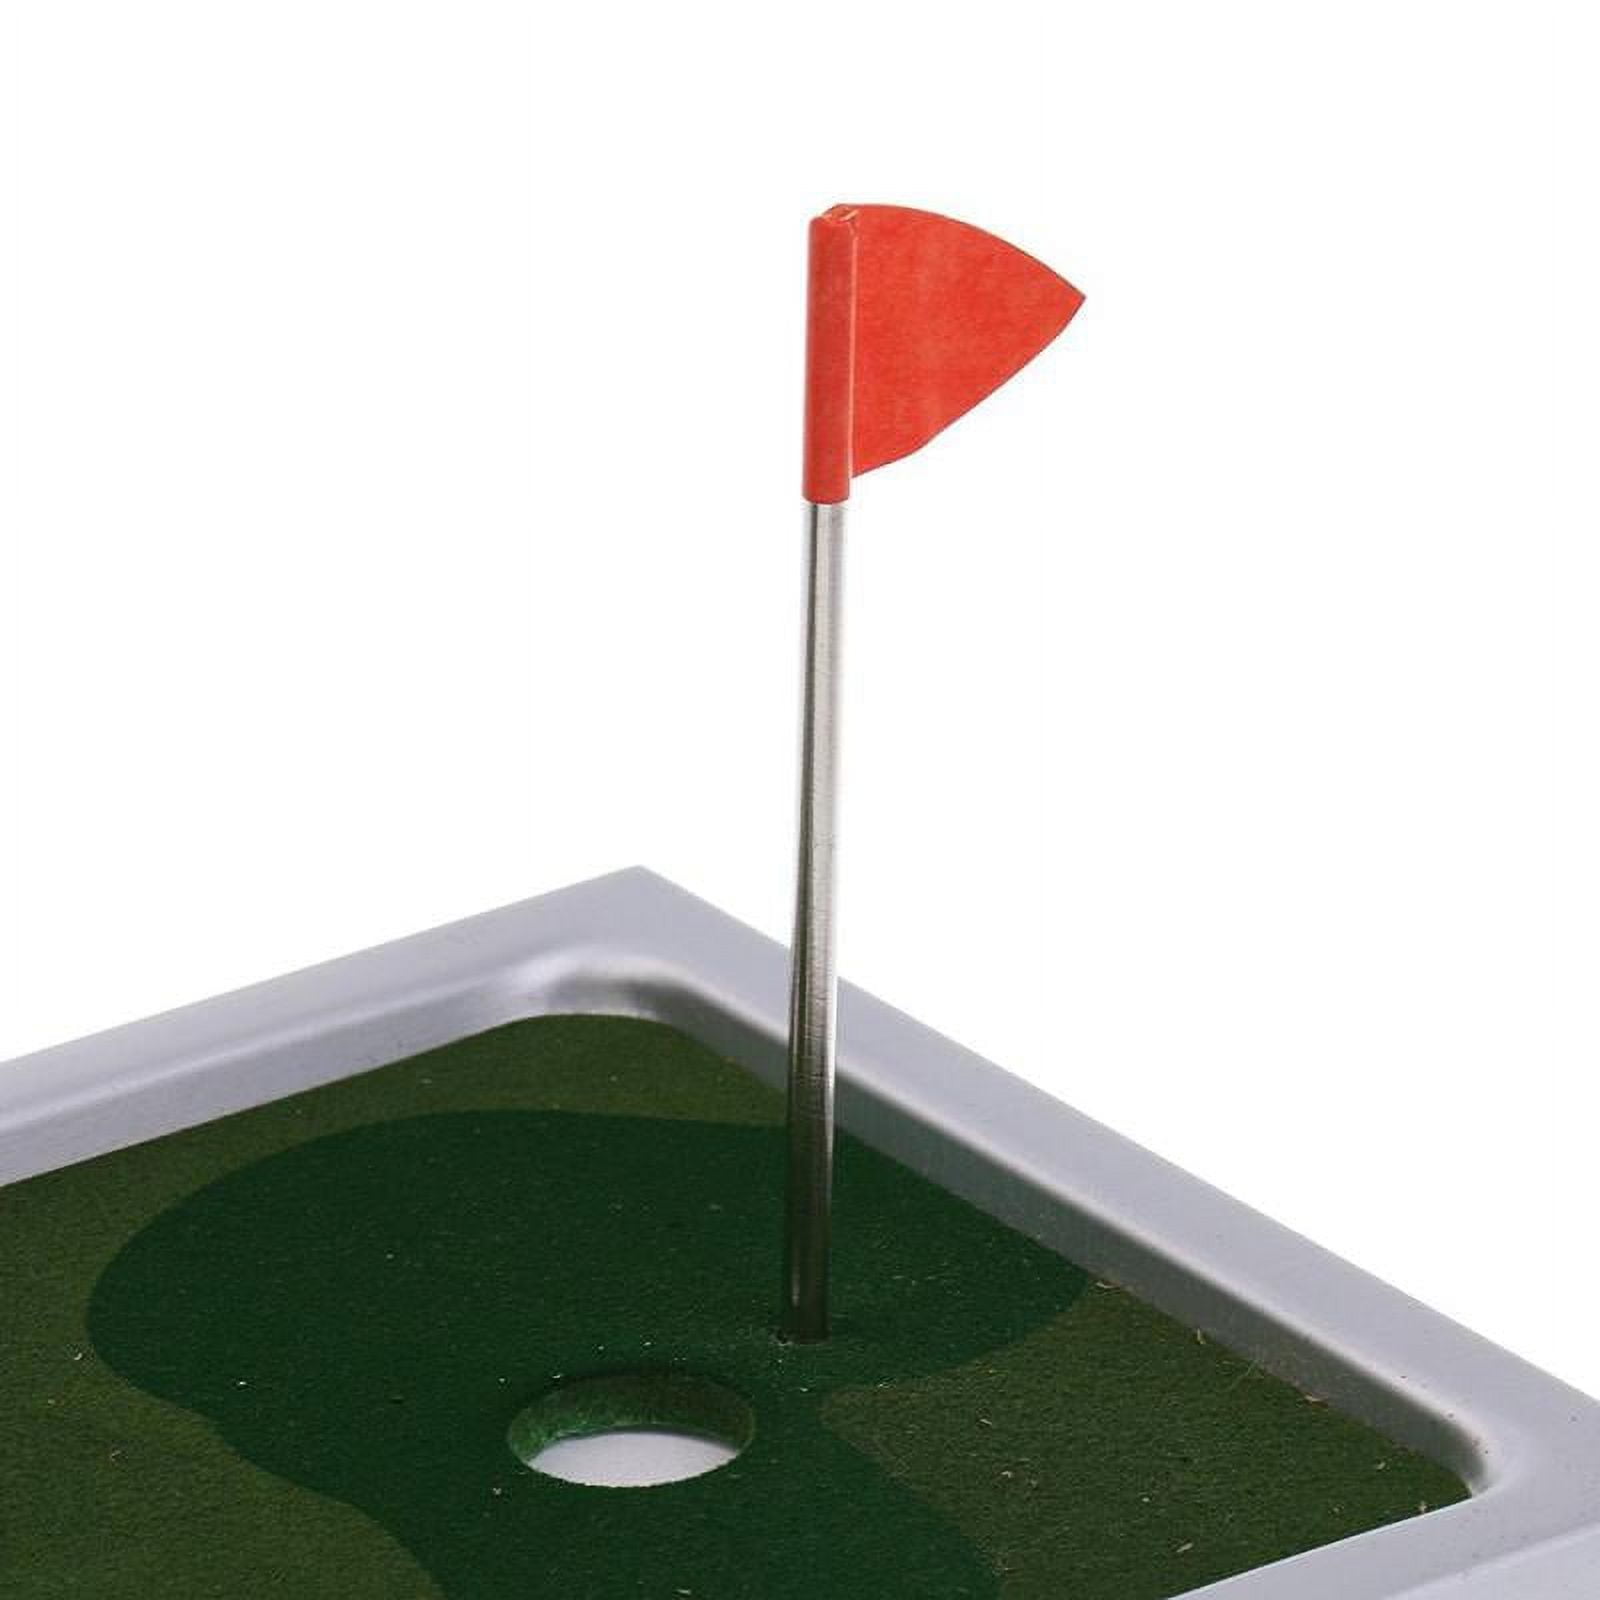 Golf Shots Tabletop Putter Game Trophy Table Top Putt Toy PGA Golfer New  Gift